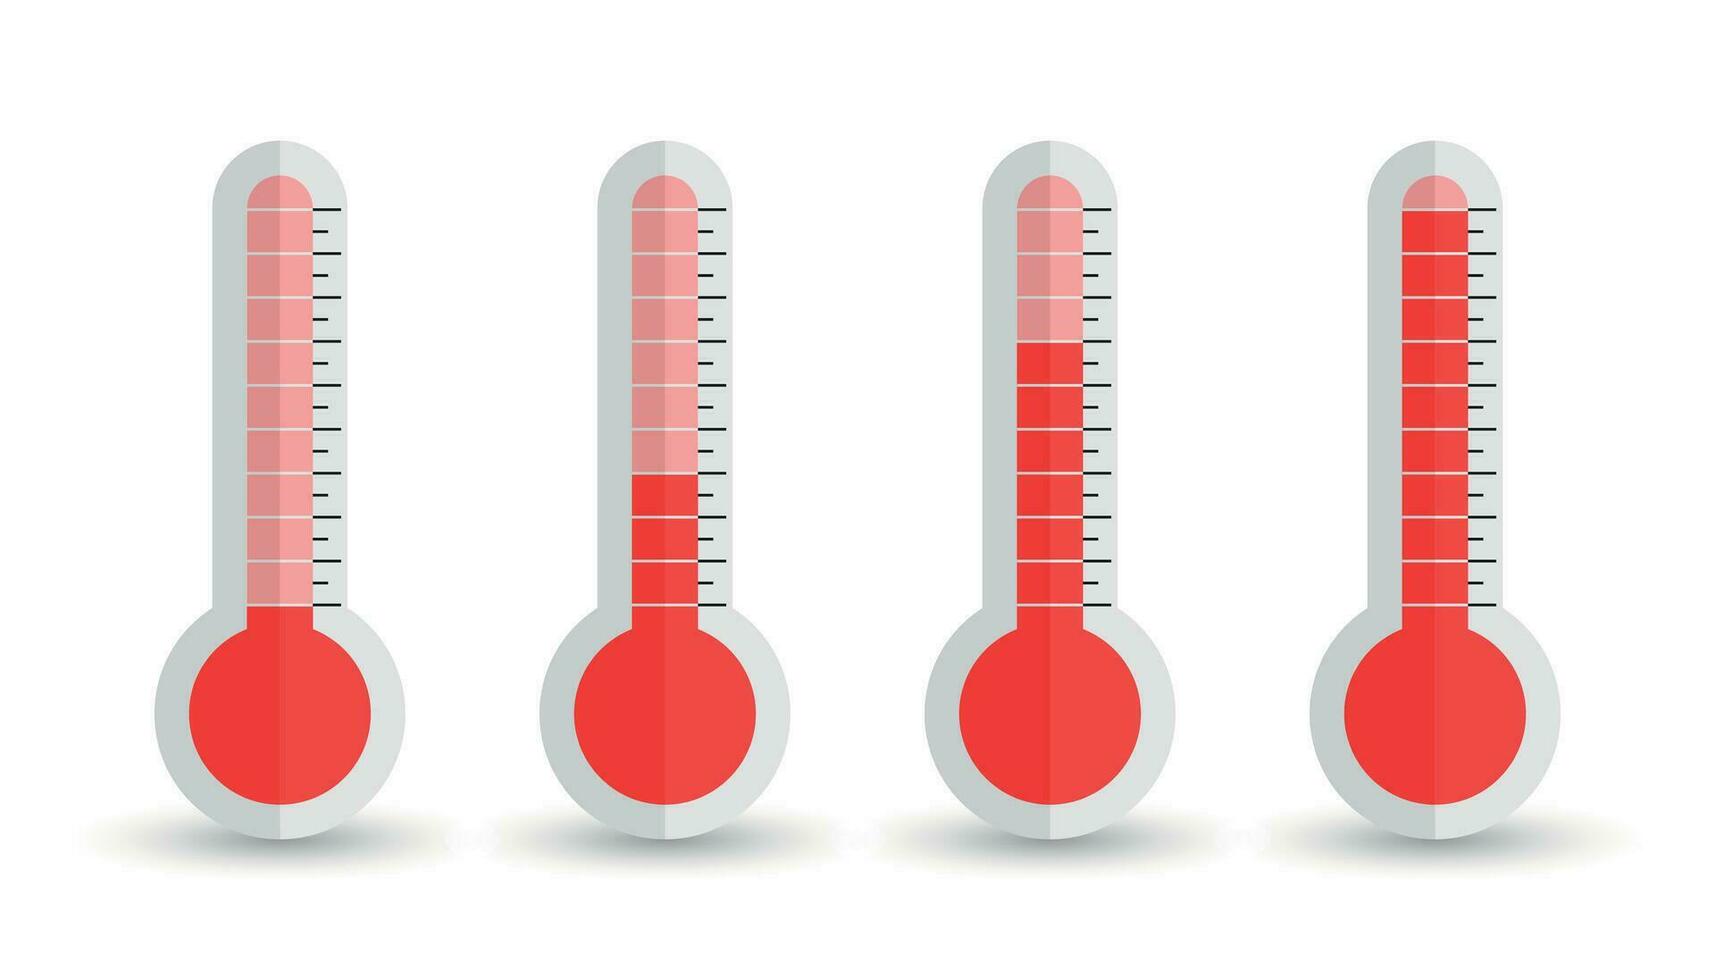 Thermometers icon with different levels. Flat vector illustration isolated on white background.